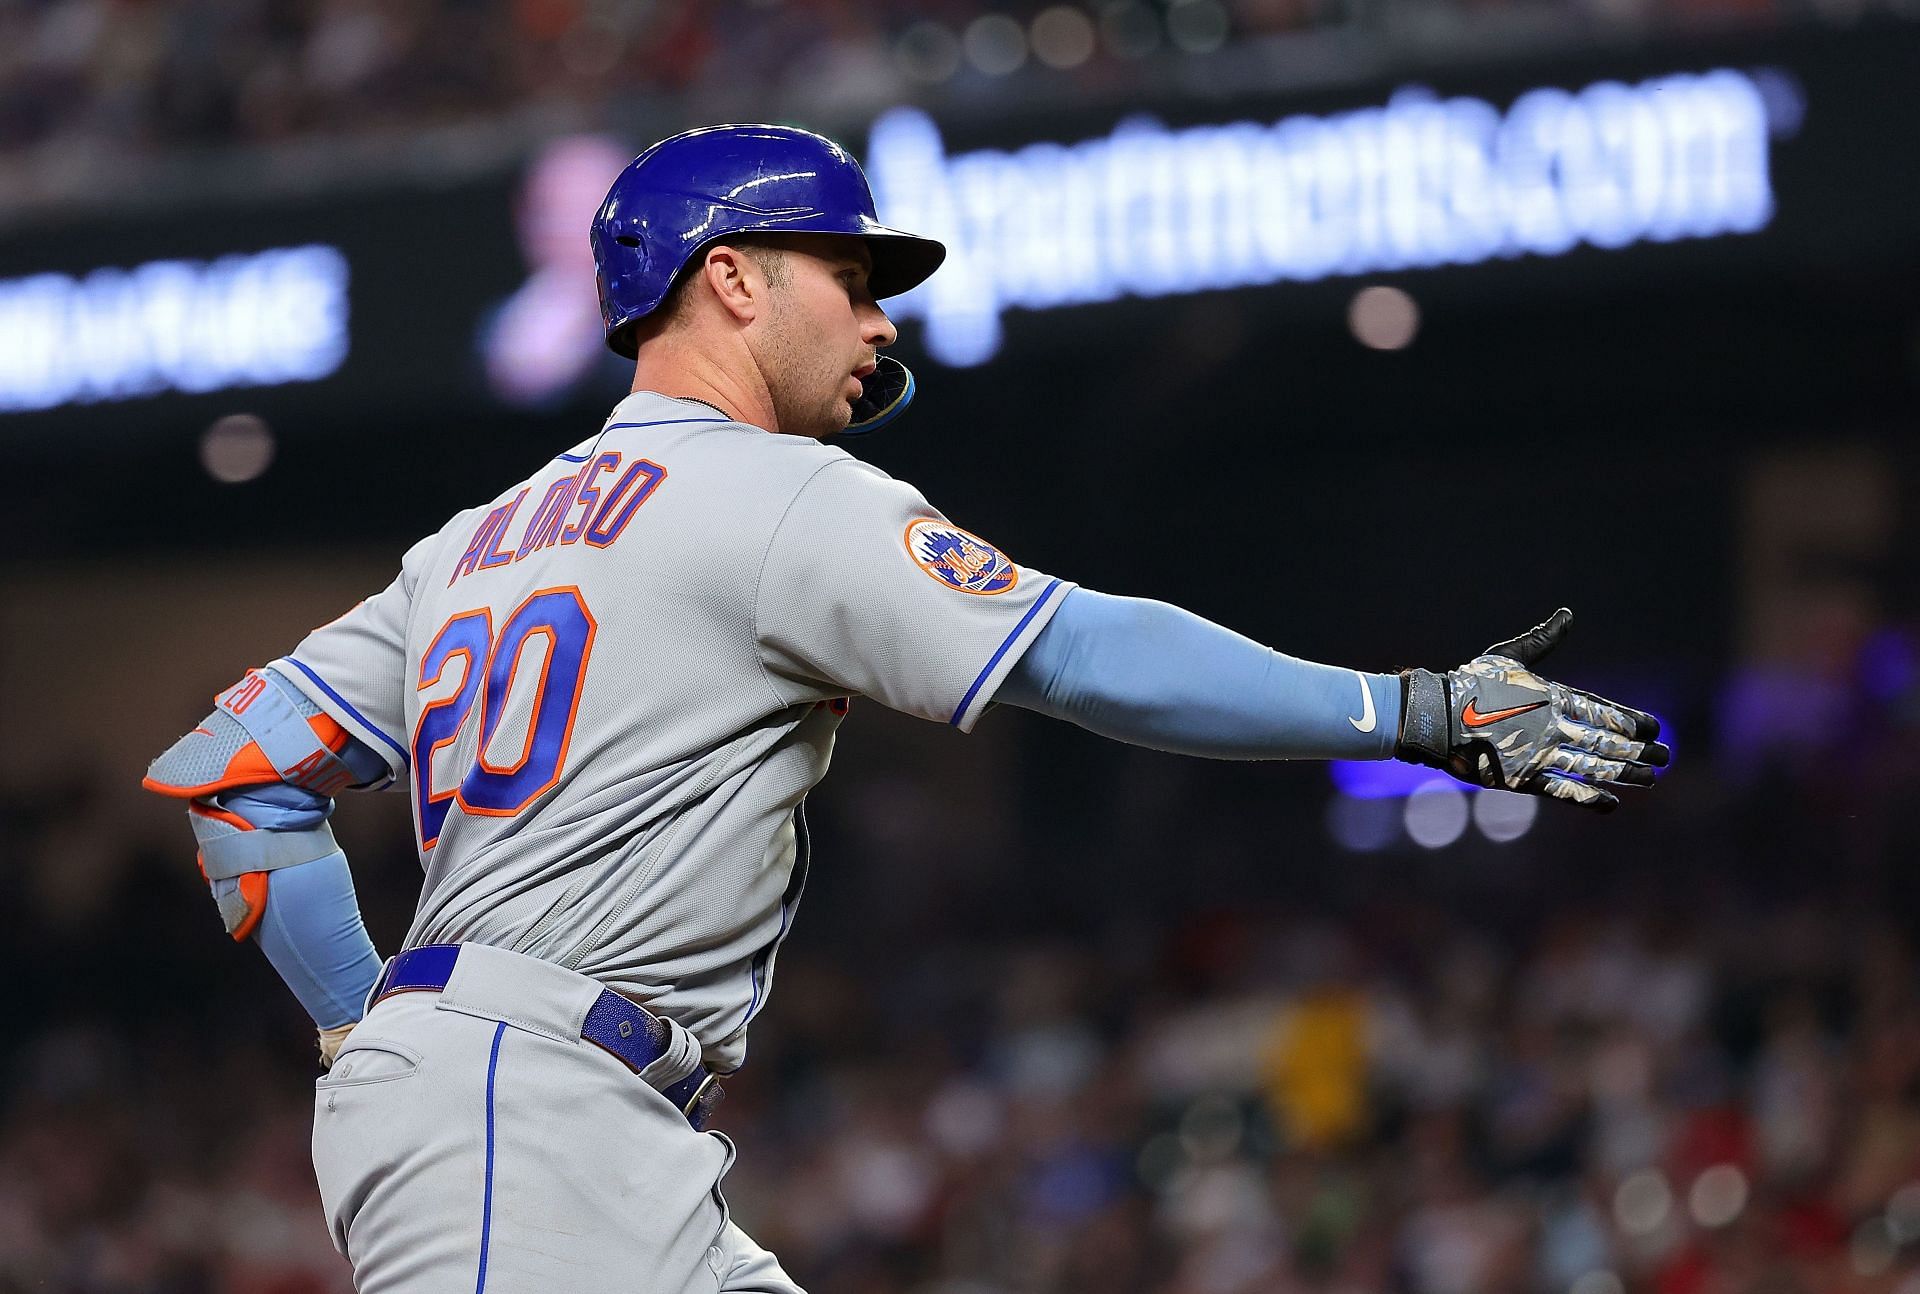 Pete Alonso #20 of the New York Mets reacts as he rounds third base after hitting a two-run homer in the third inning against the Atlanta Braves at Truist Park on June 06, 2023 in Atlanta, Georgia. (Photo by Kevin C. Cox/Getty Images)